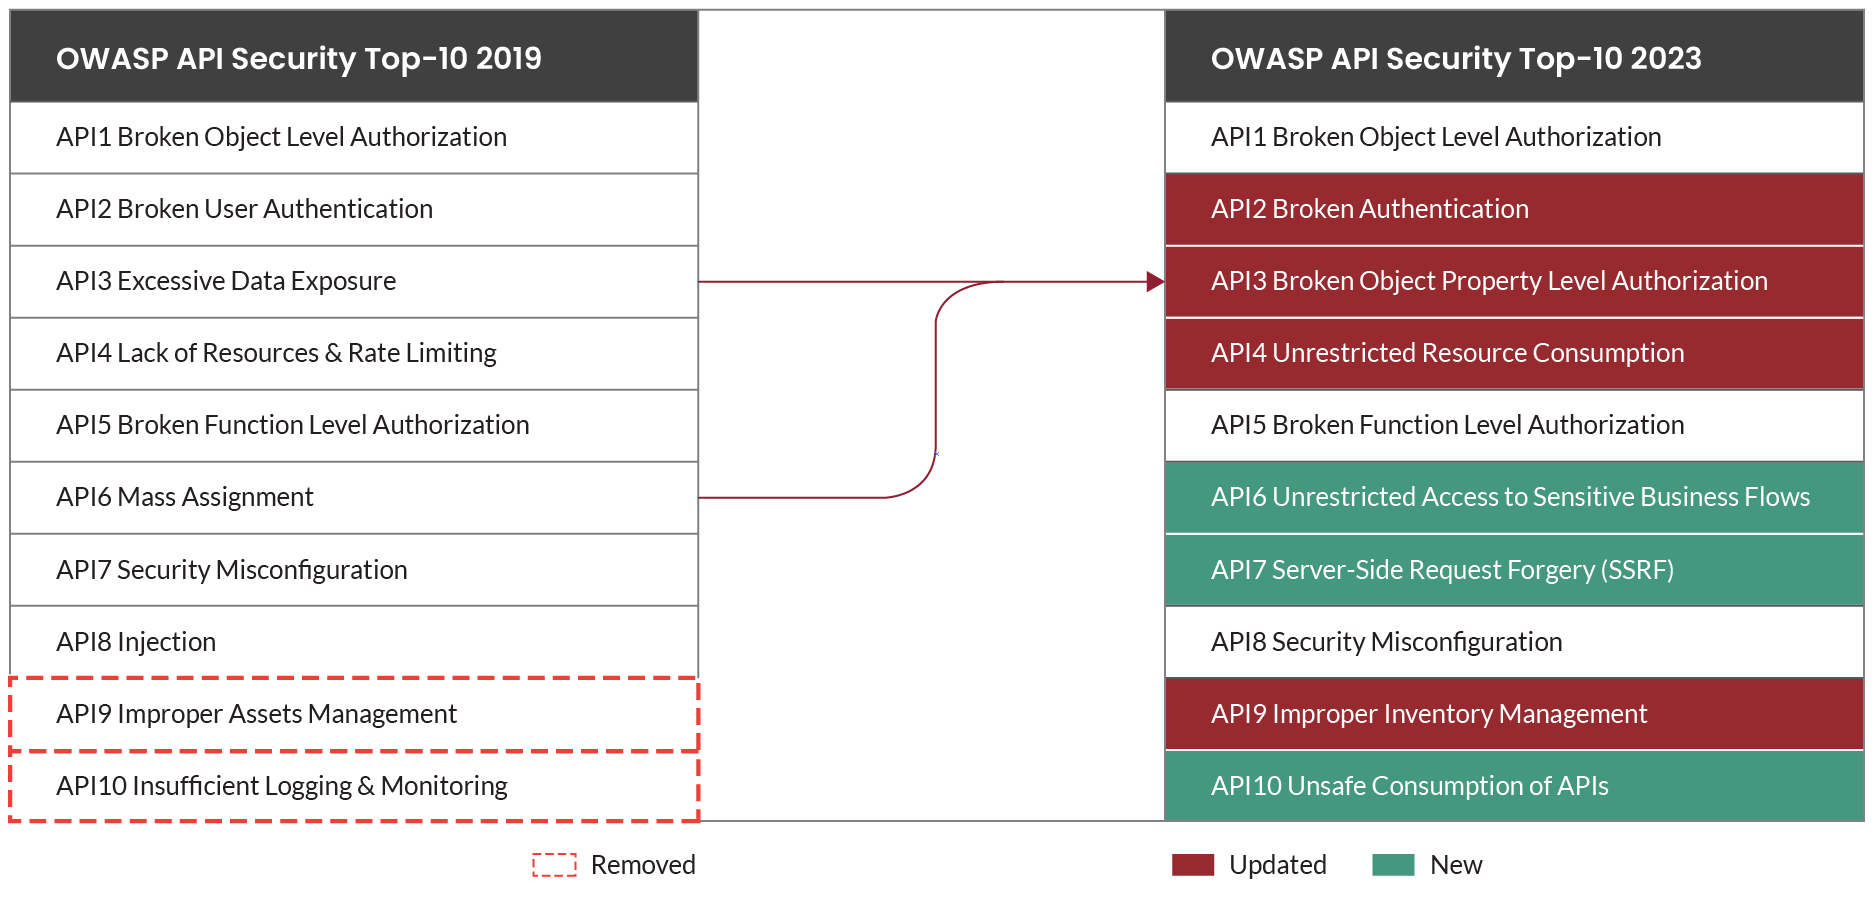 OWASP-2023-top-10-2019-difference